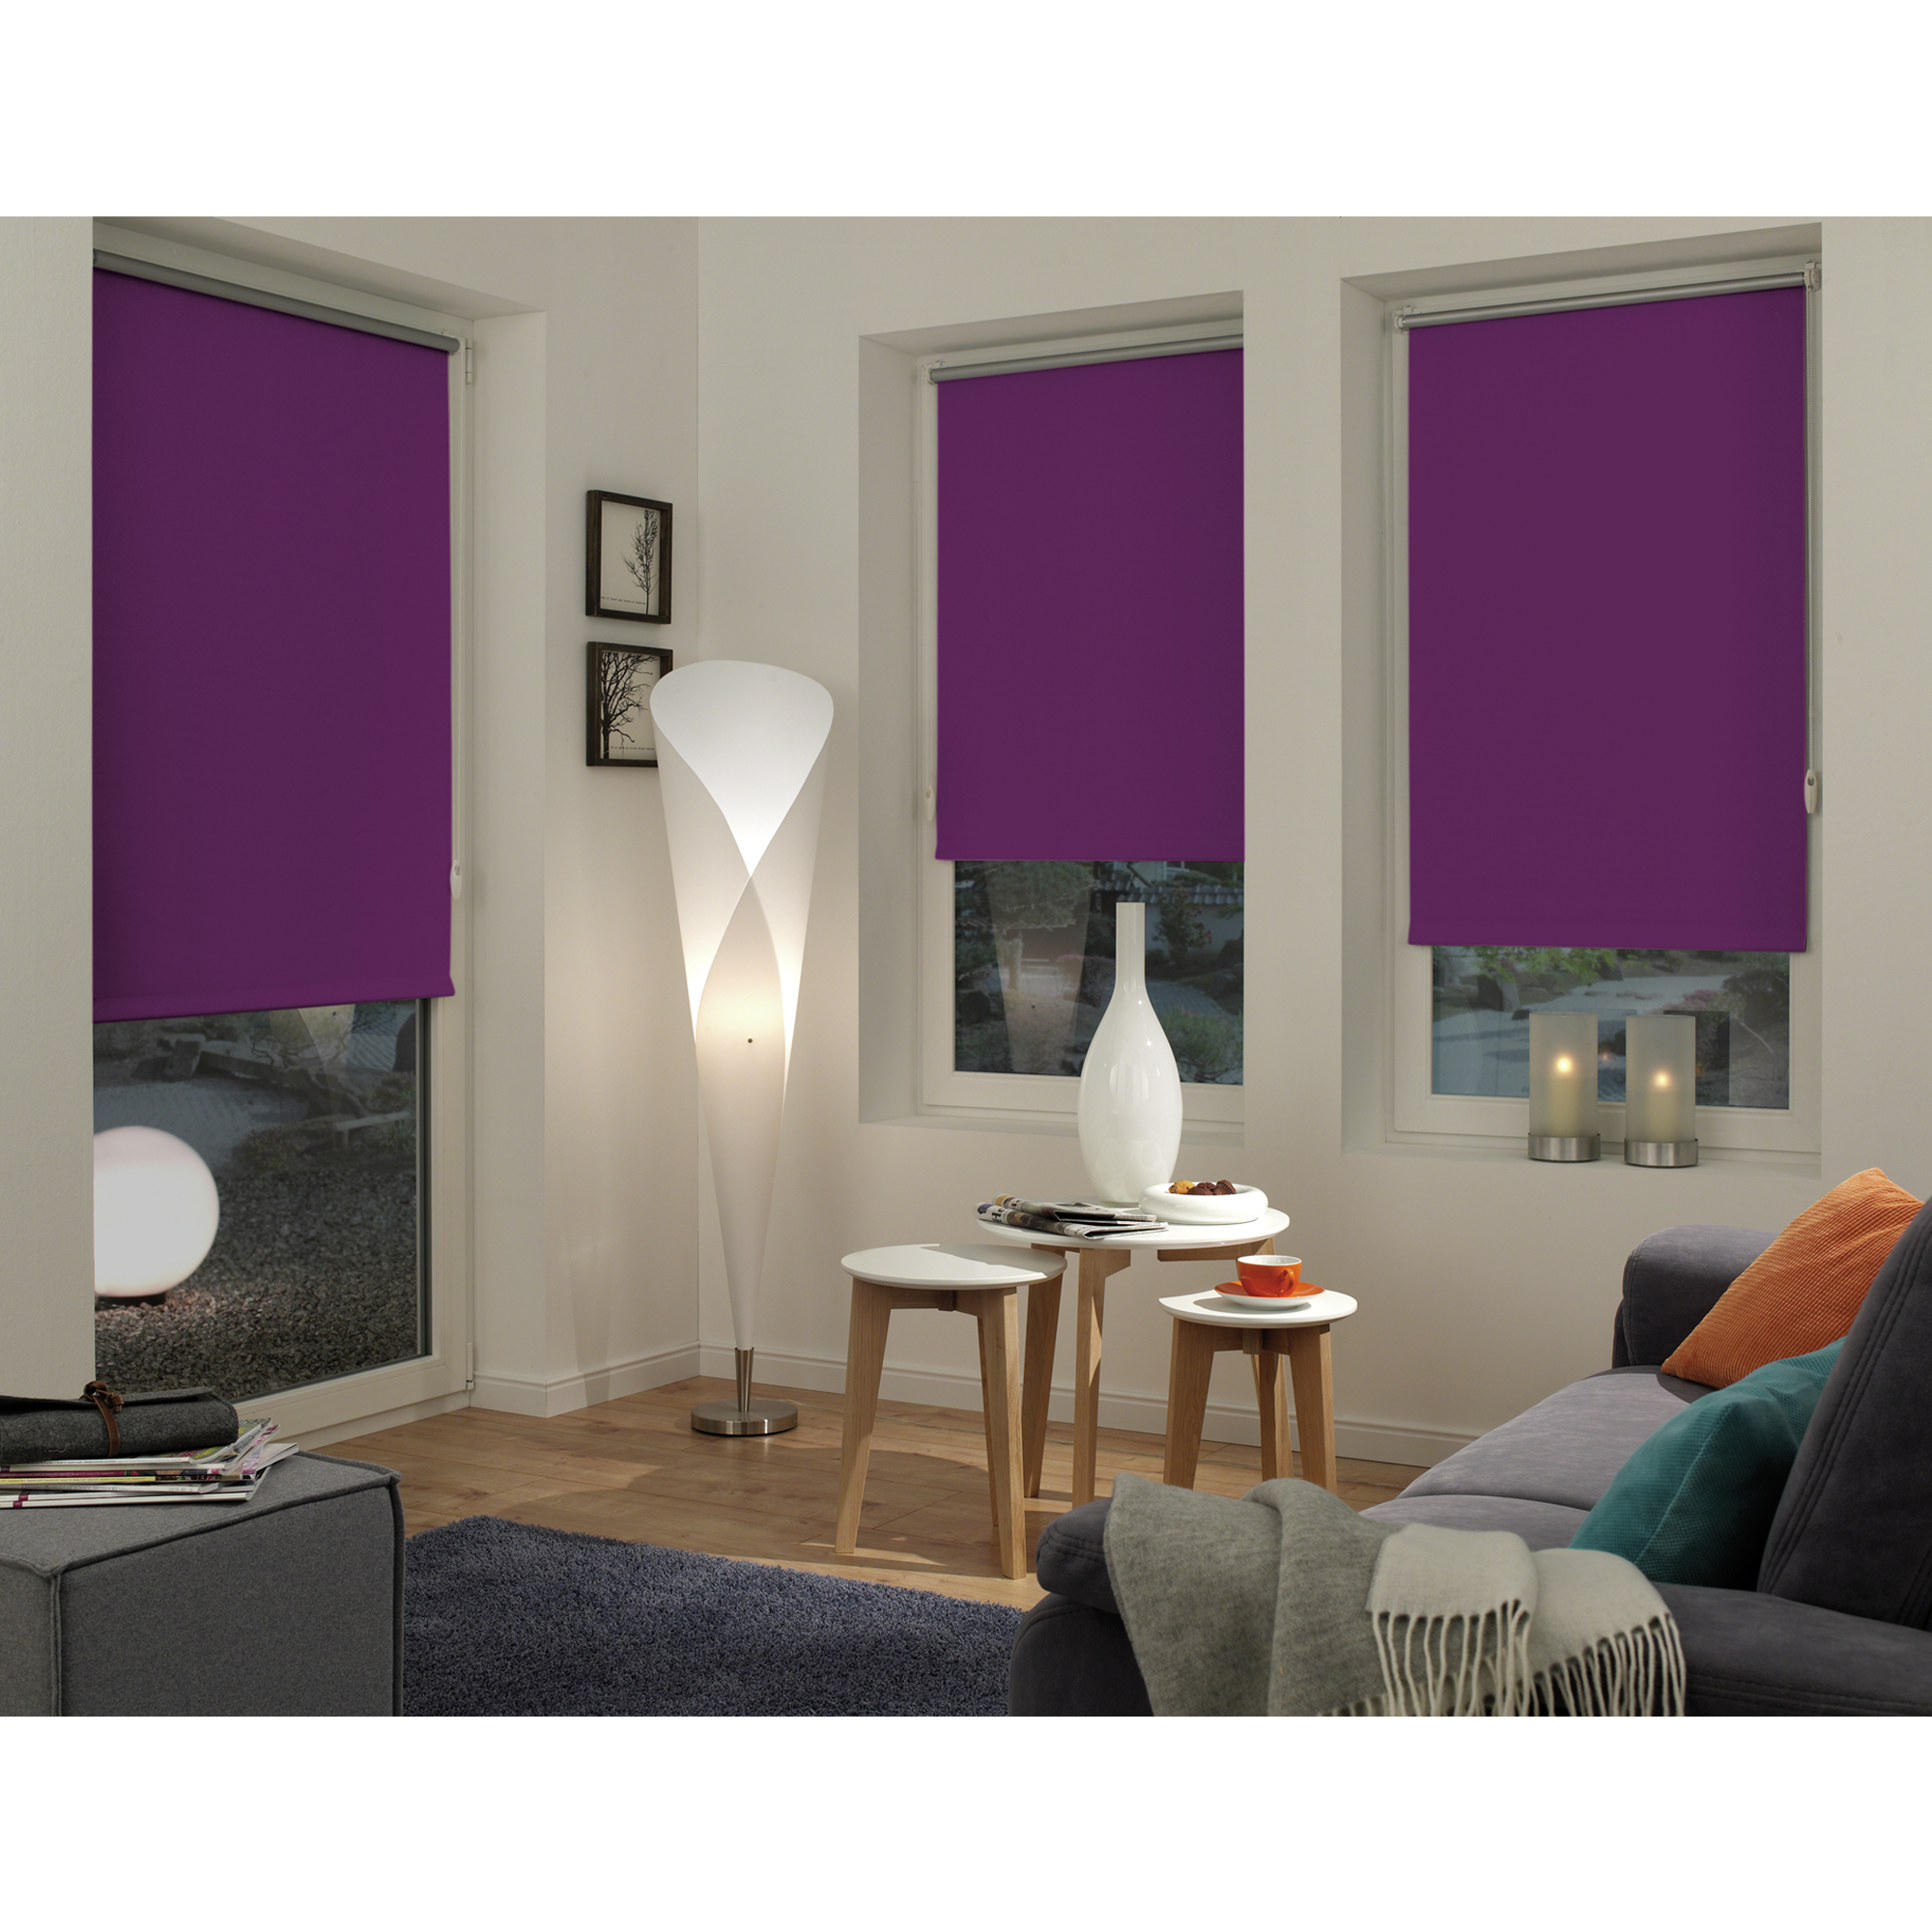 EasyFix Rollo 'Thermo energiesparend' lila 60 x 150 cm + product picture